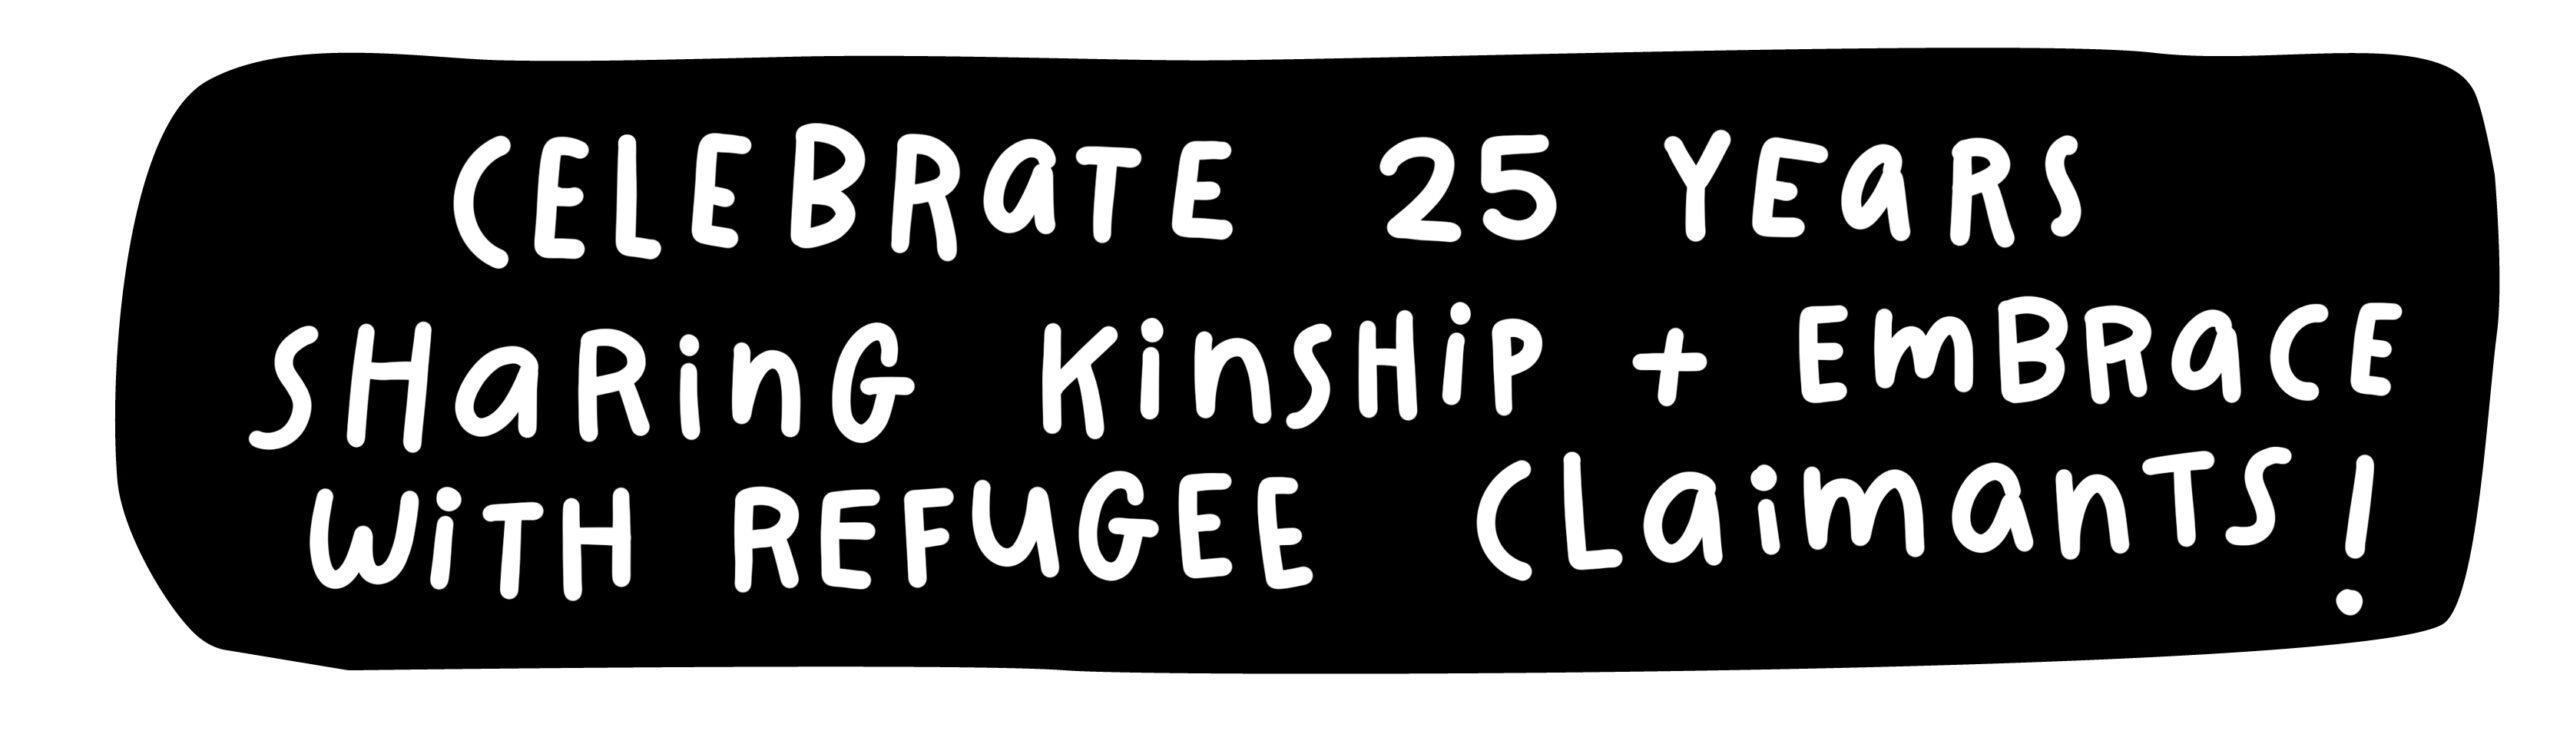 Celebrate 25 years sharing Kinship & Embrace with Refugee Claimants!